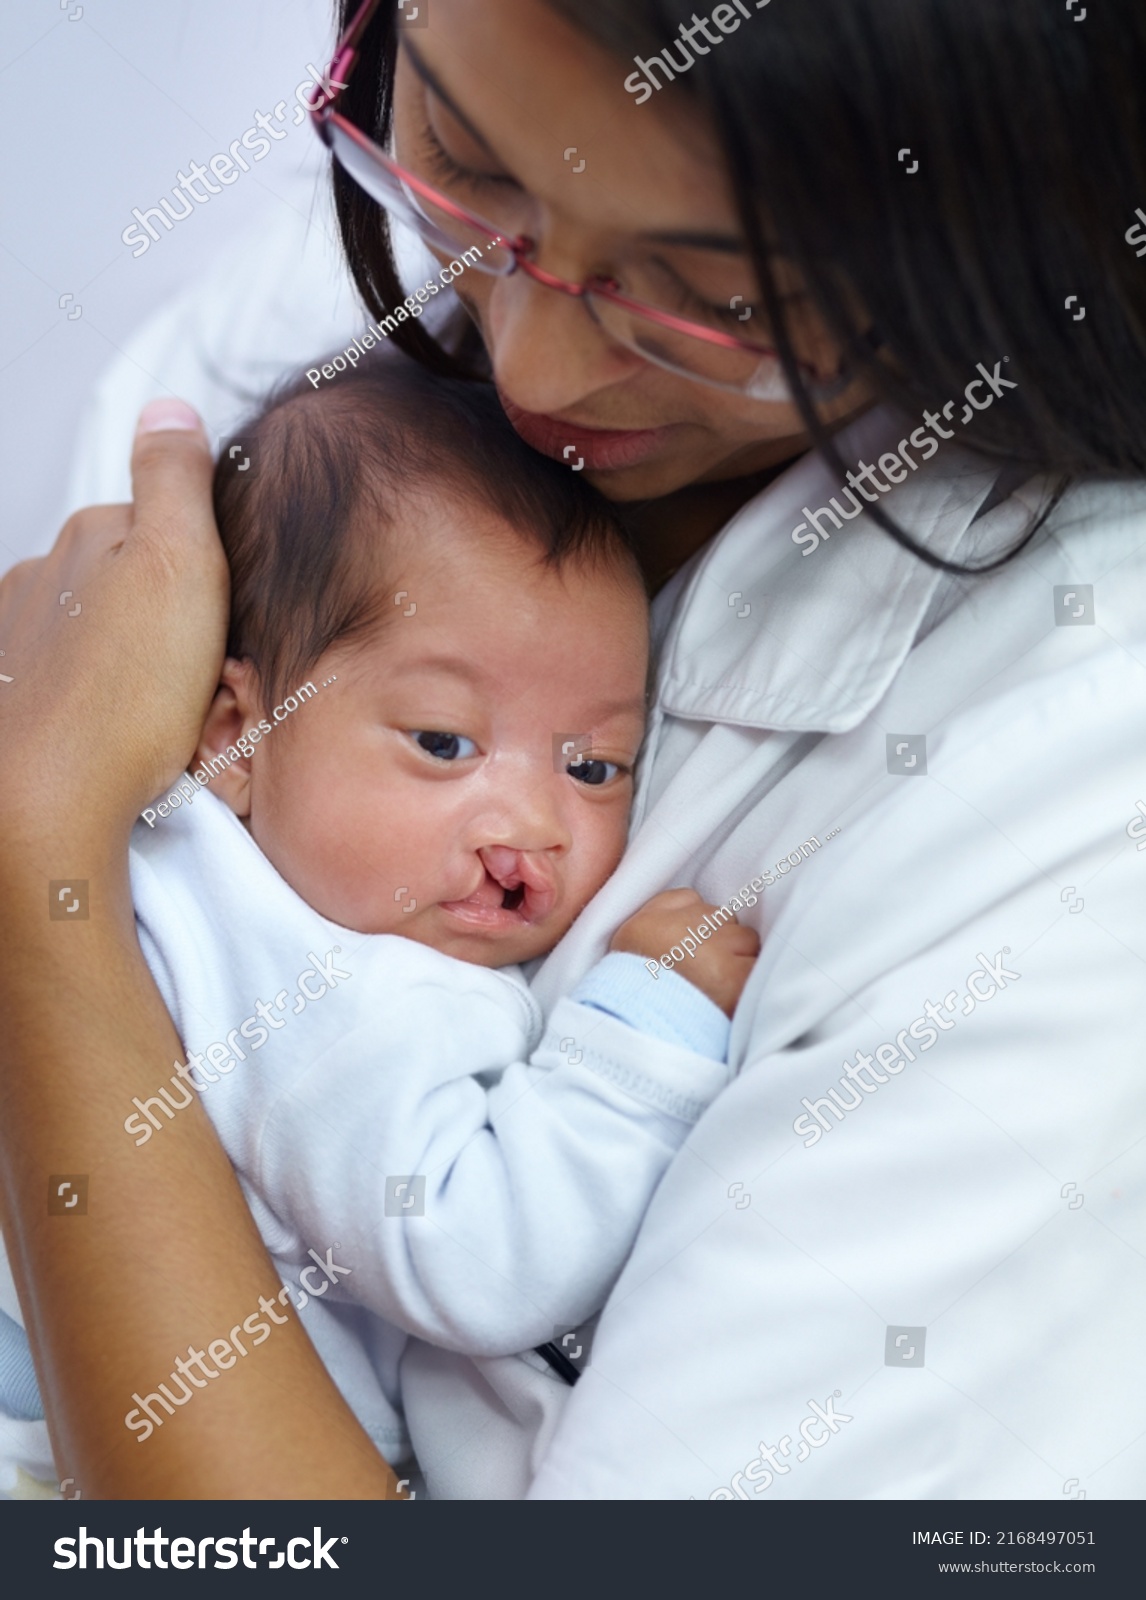 Giving comfort is key in her profession. Shot of a young female nurse holding a baby who has a cleft palate. #2168497051